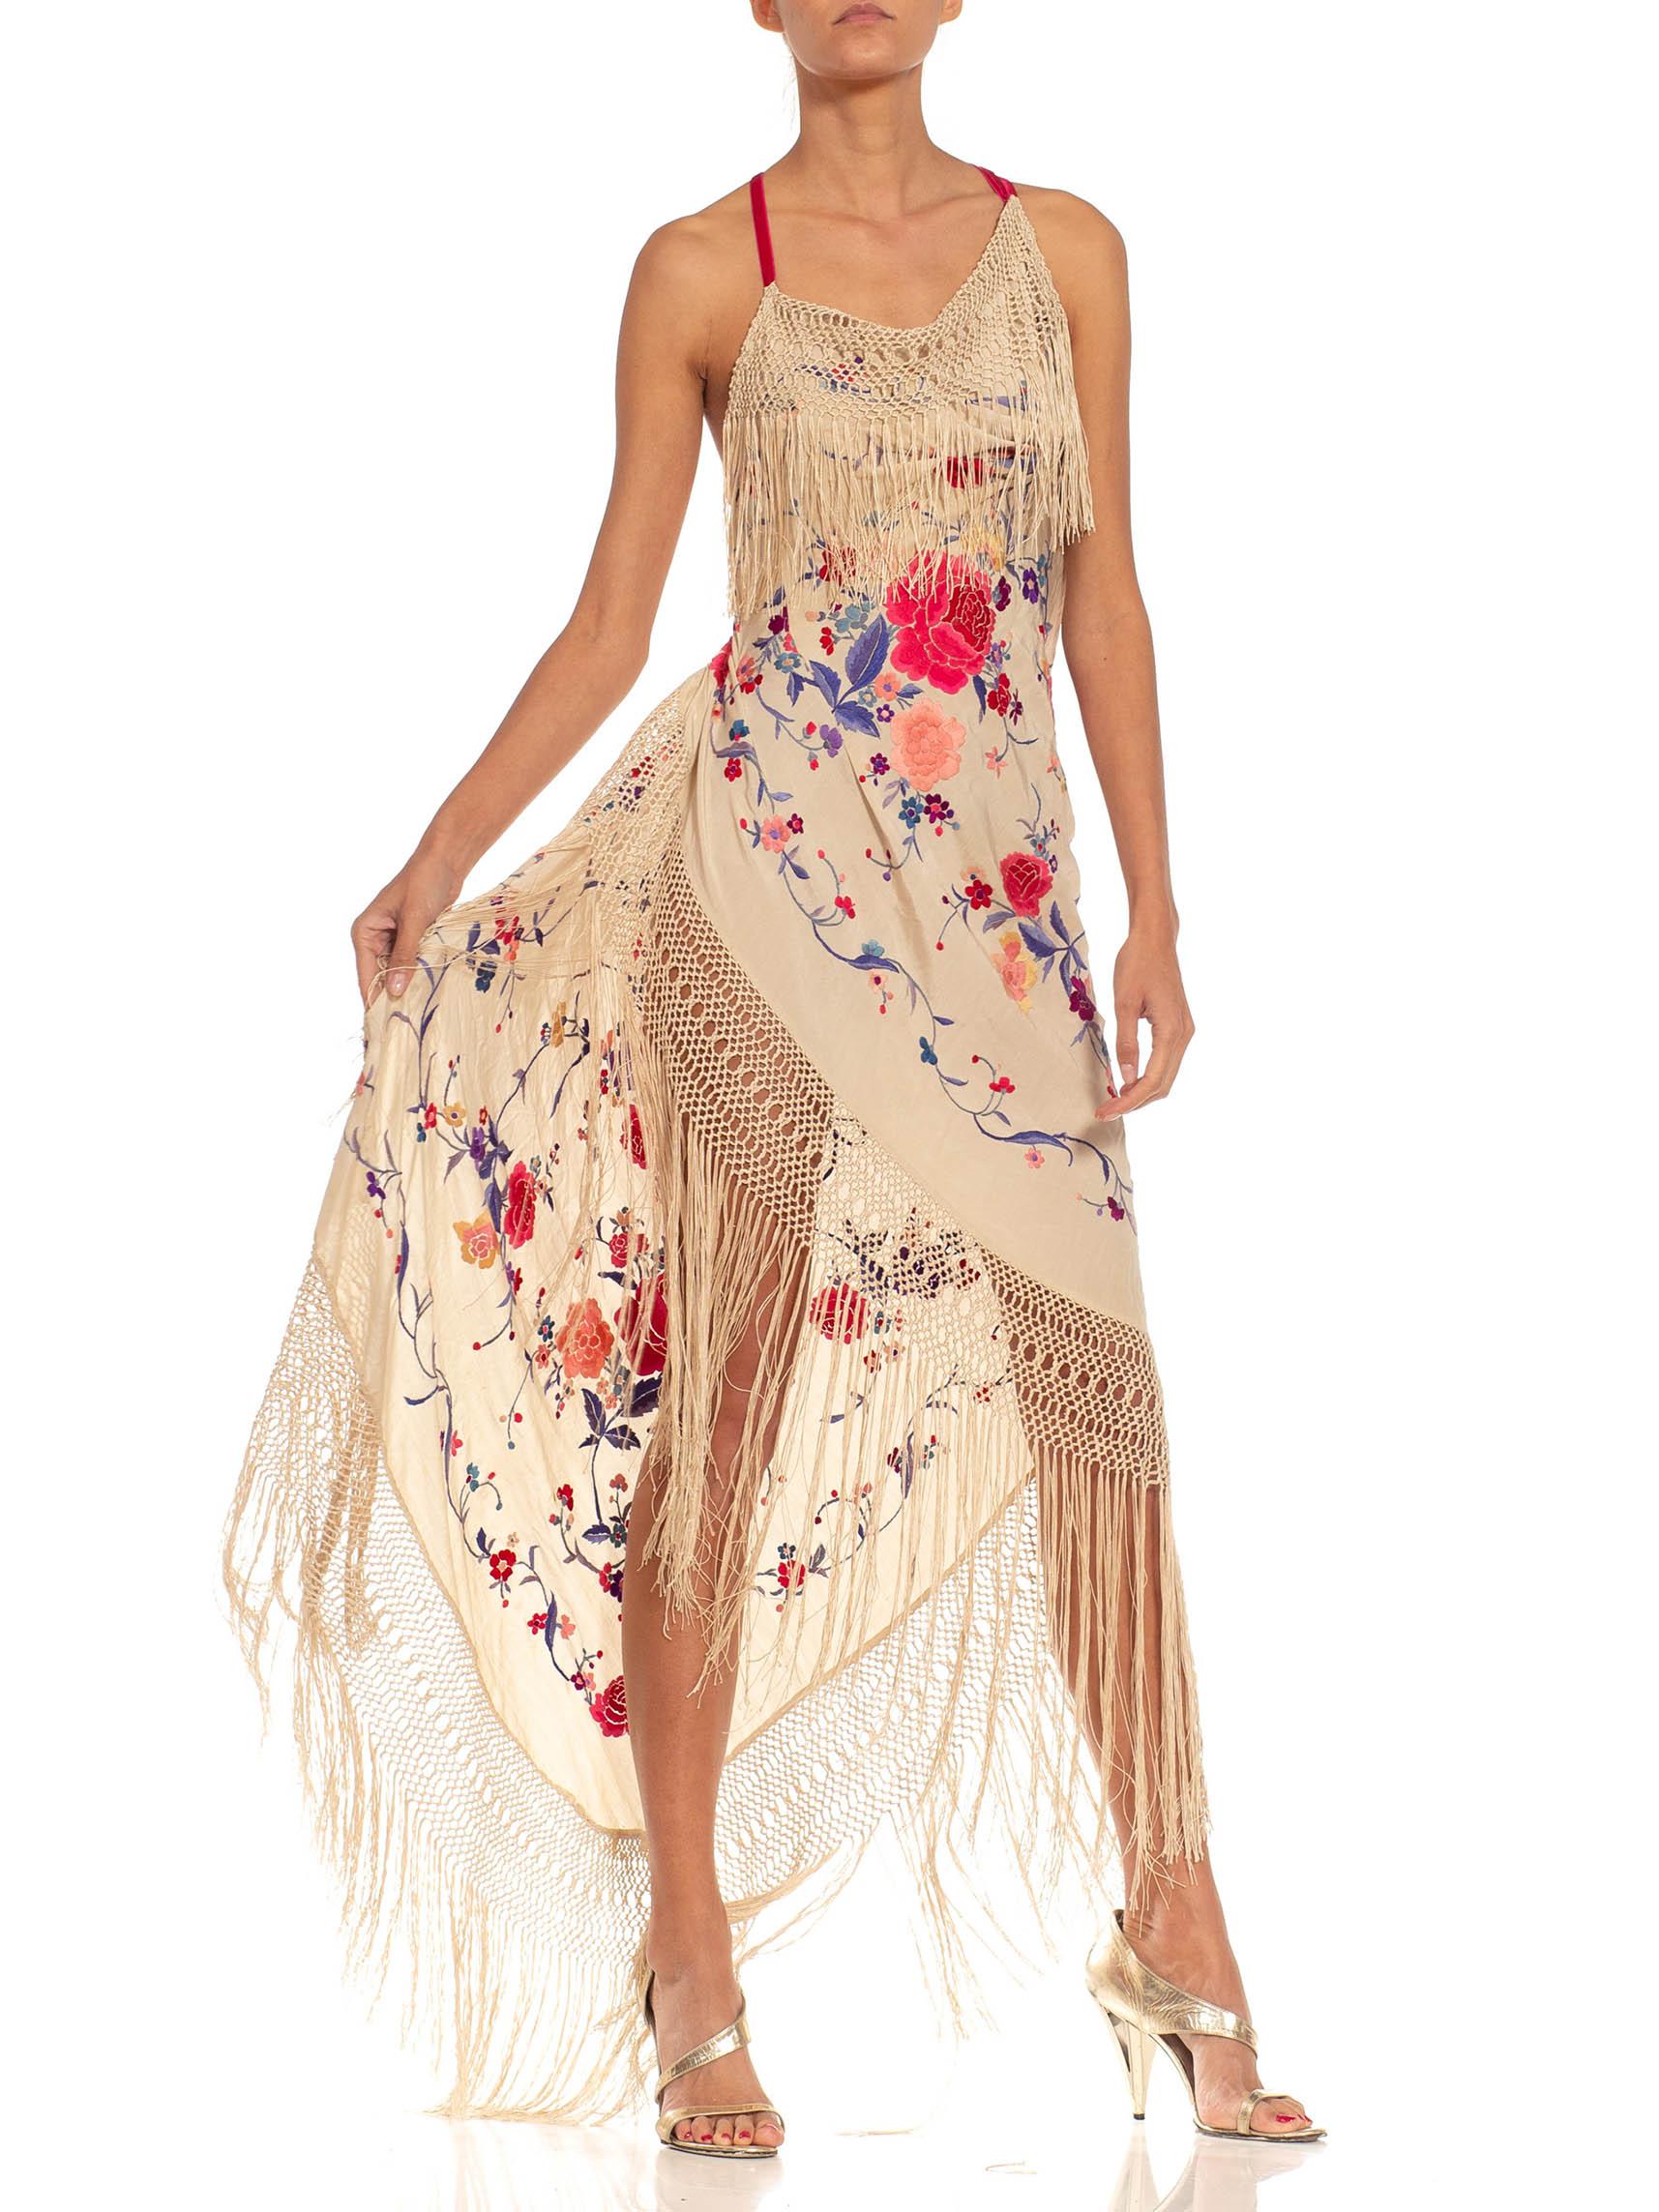 MORPHEW ATELIER Beige Bias Cut Fringed Dress Made From 1920S Hand-Embroidered S For Sale 3